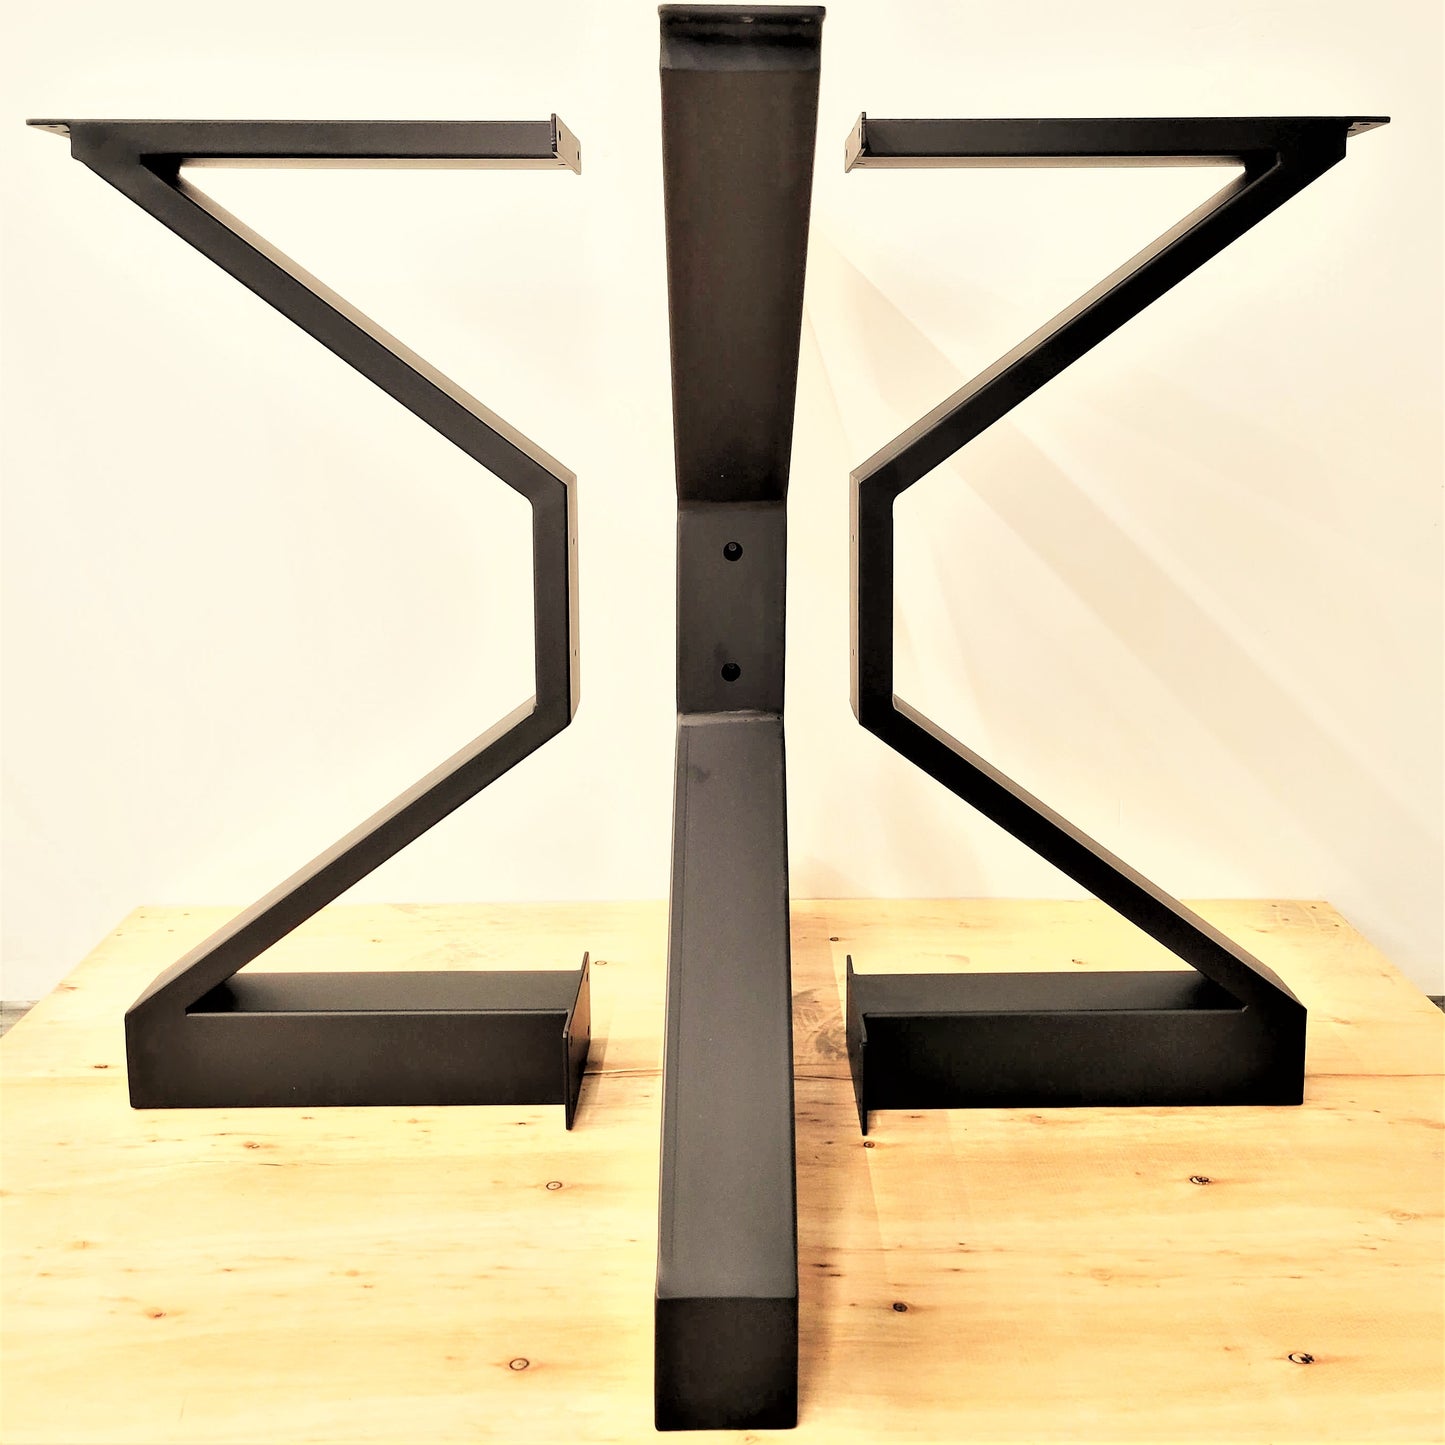 Round Coffee Table Legs, Spider Legs, Spider Shaped Legs, Furniture Legs, Table Base, Coffee Table Legs, Furniture Feet, Metal Legs, Steel Table Legs, Coffee Table Base, Metal Table Base, Pedestal Dining Table Legs